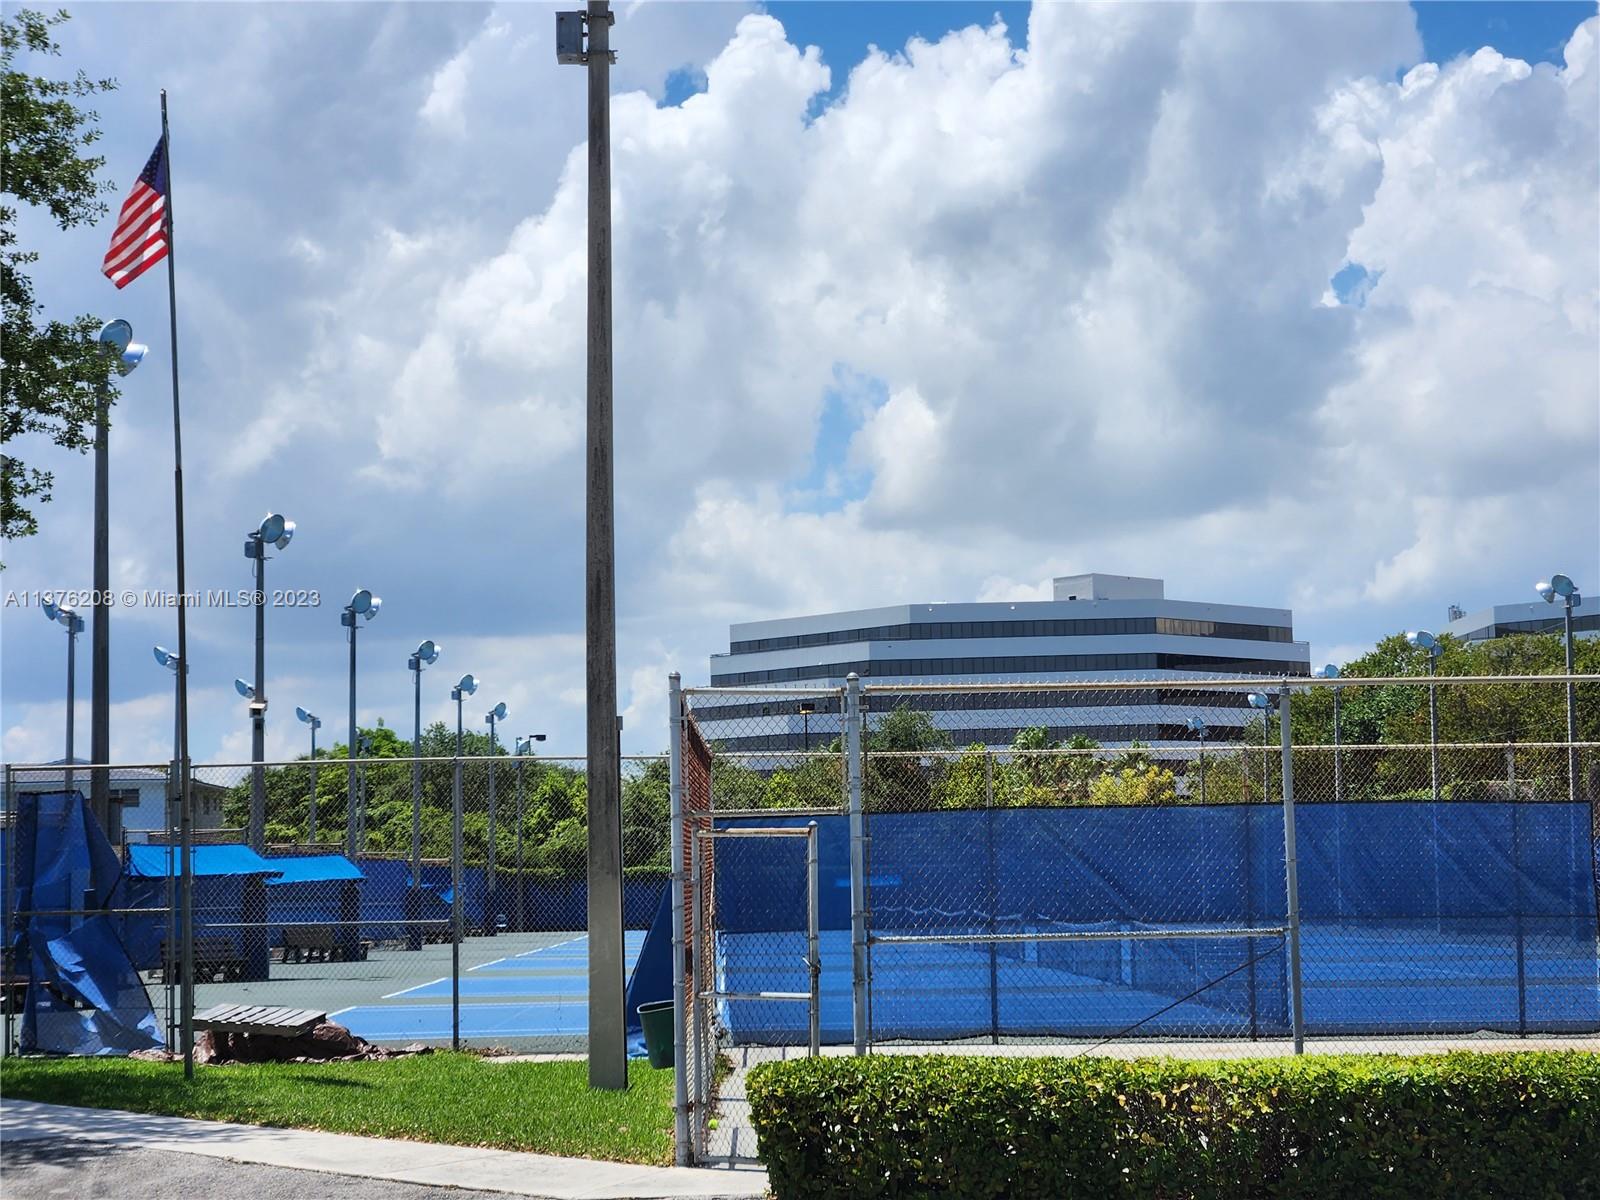 Tennis Courts side of the Building